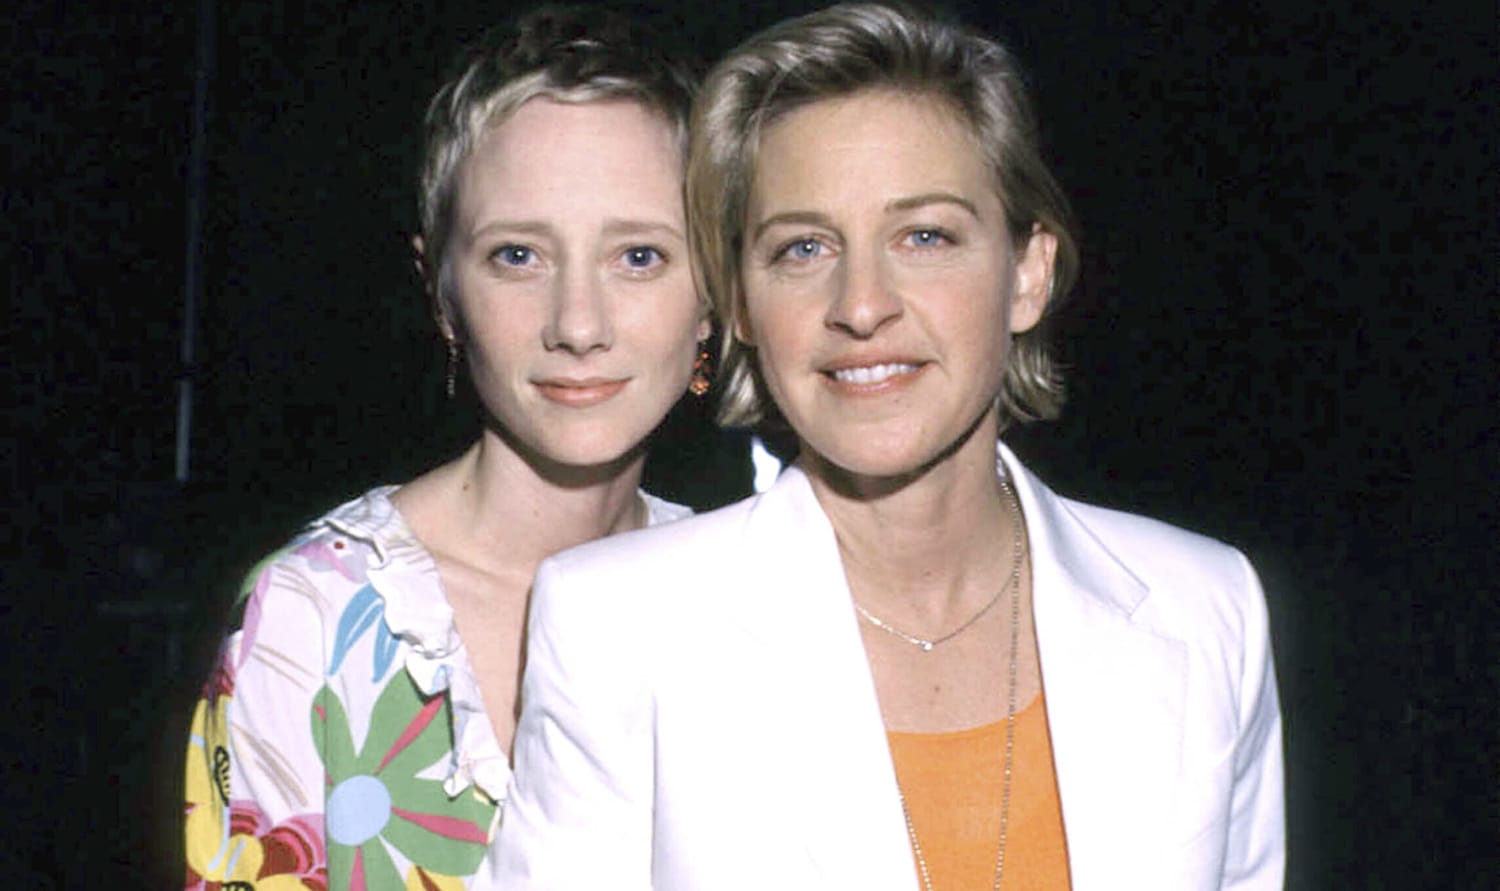 Who Credentials collateral Ellen DeGeneres sends her love to Anne Heche's family and friends